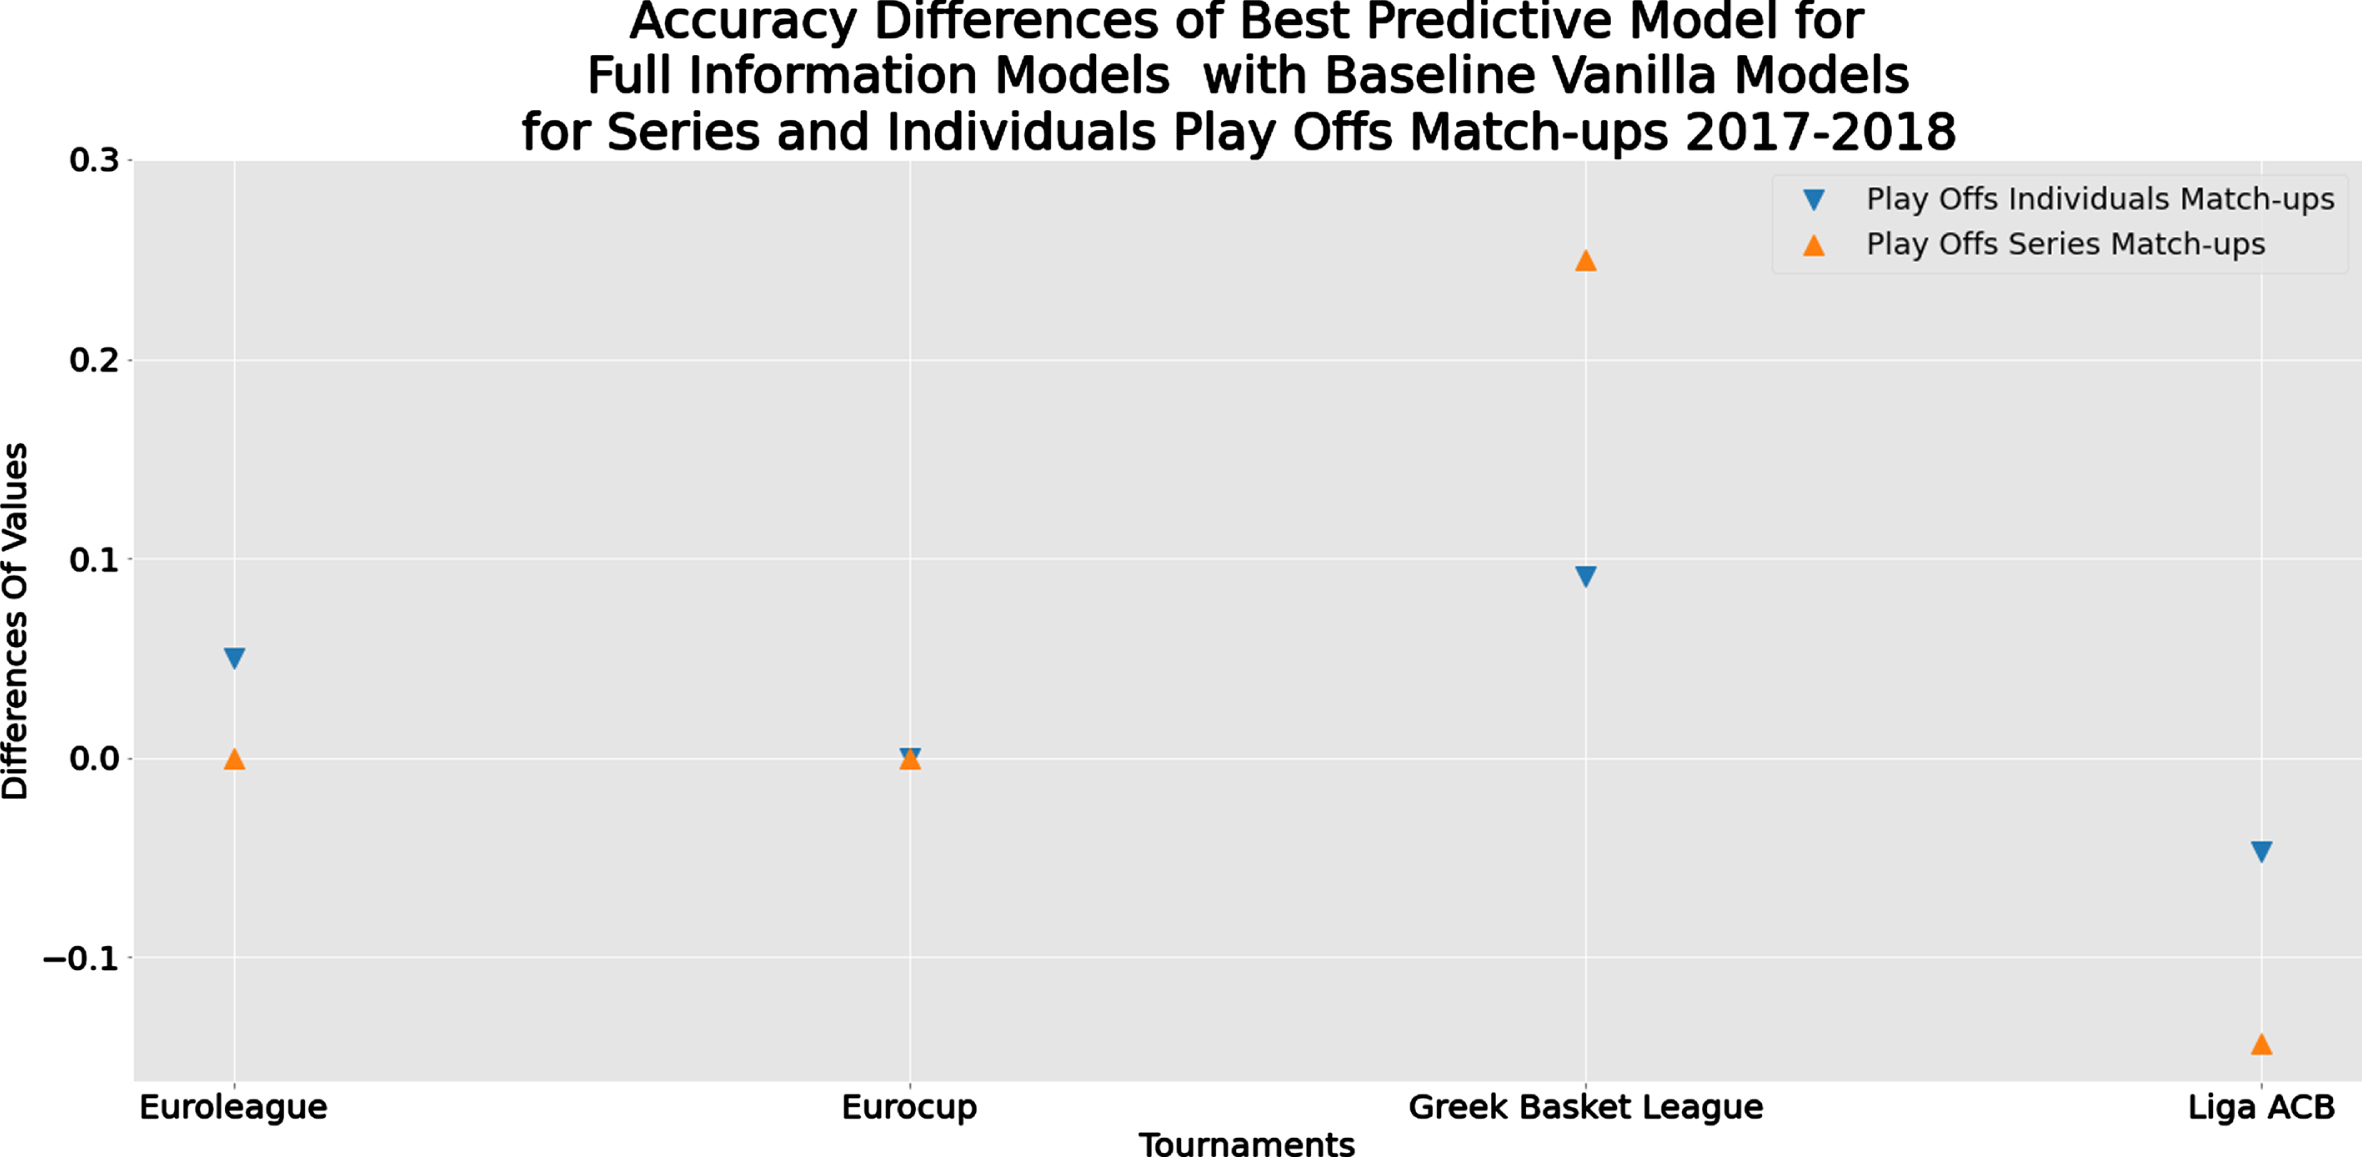 Comparison of the accuracy differences of evaluation metrics between the best performed methods of the Full Information and the Baseline Vanilla Model for series and individuals play-offs match-ups 2017-2018.